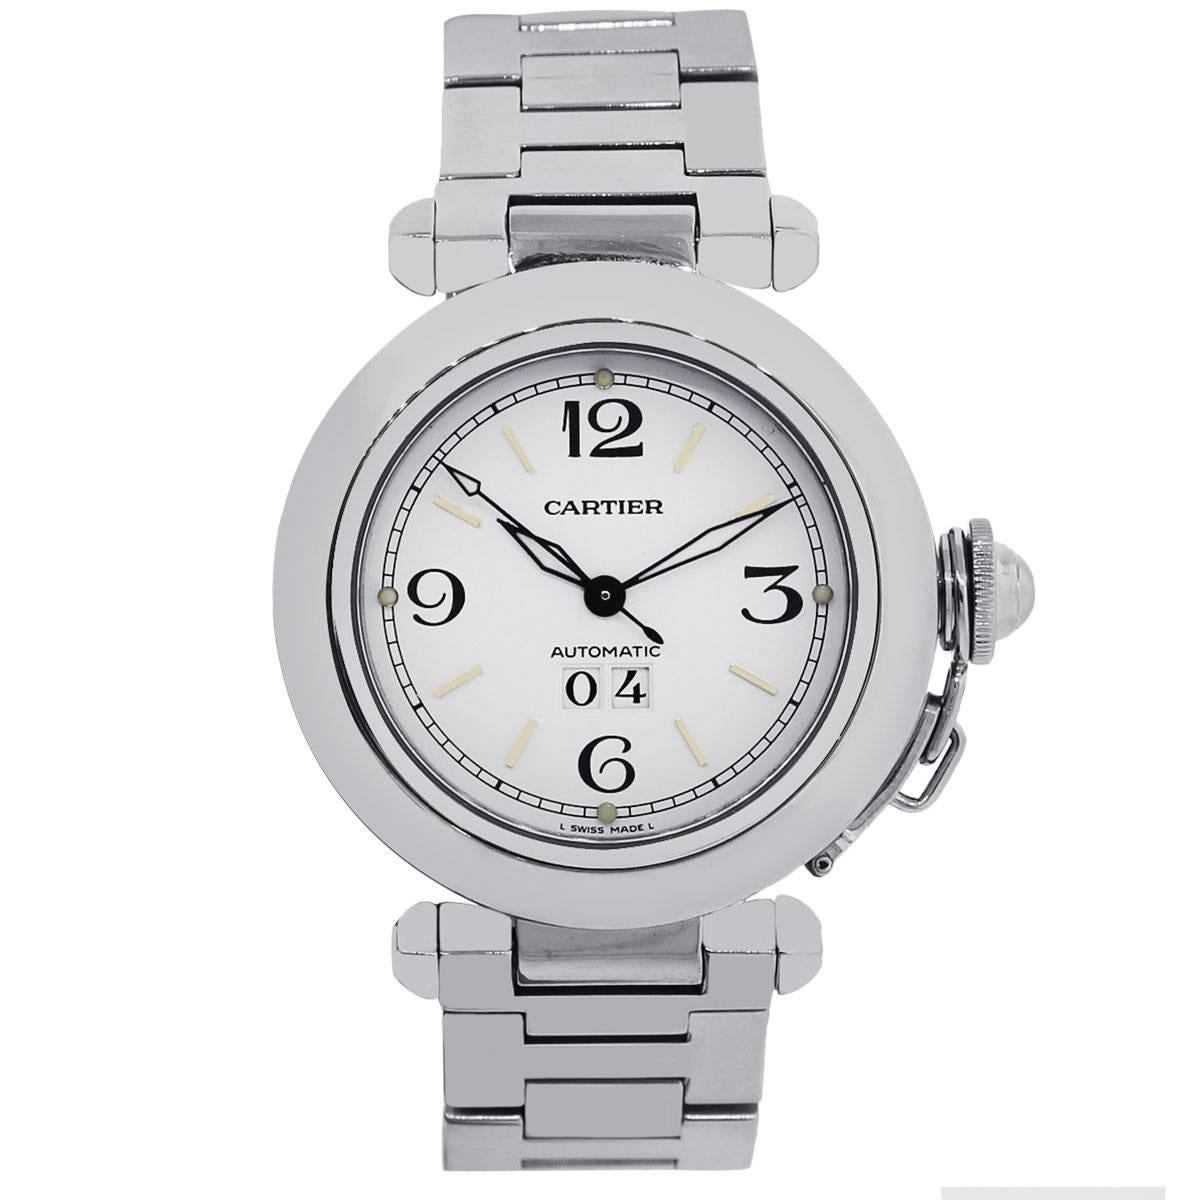 Brand: Cartier
MPN: W31044M7
Model: Pasha
Case Material: Stainless Steel
Case Diameter: 35mm
Crystal: Scratch resistant sapphire
Bezel: Smooth fixed stainless steel bezel
Dial: White dial with date displayed at 6 o’ clock. Date, Hours, Minutes, and